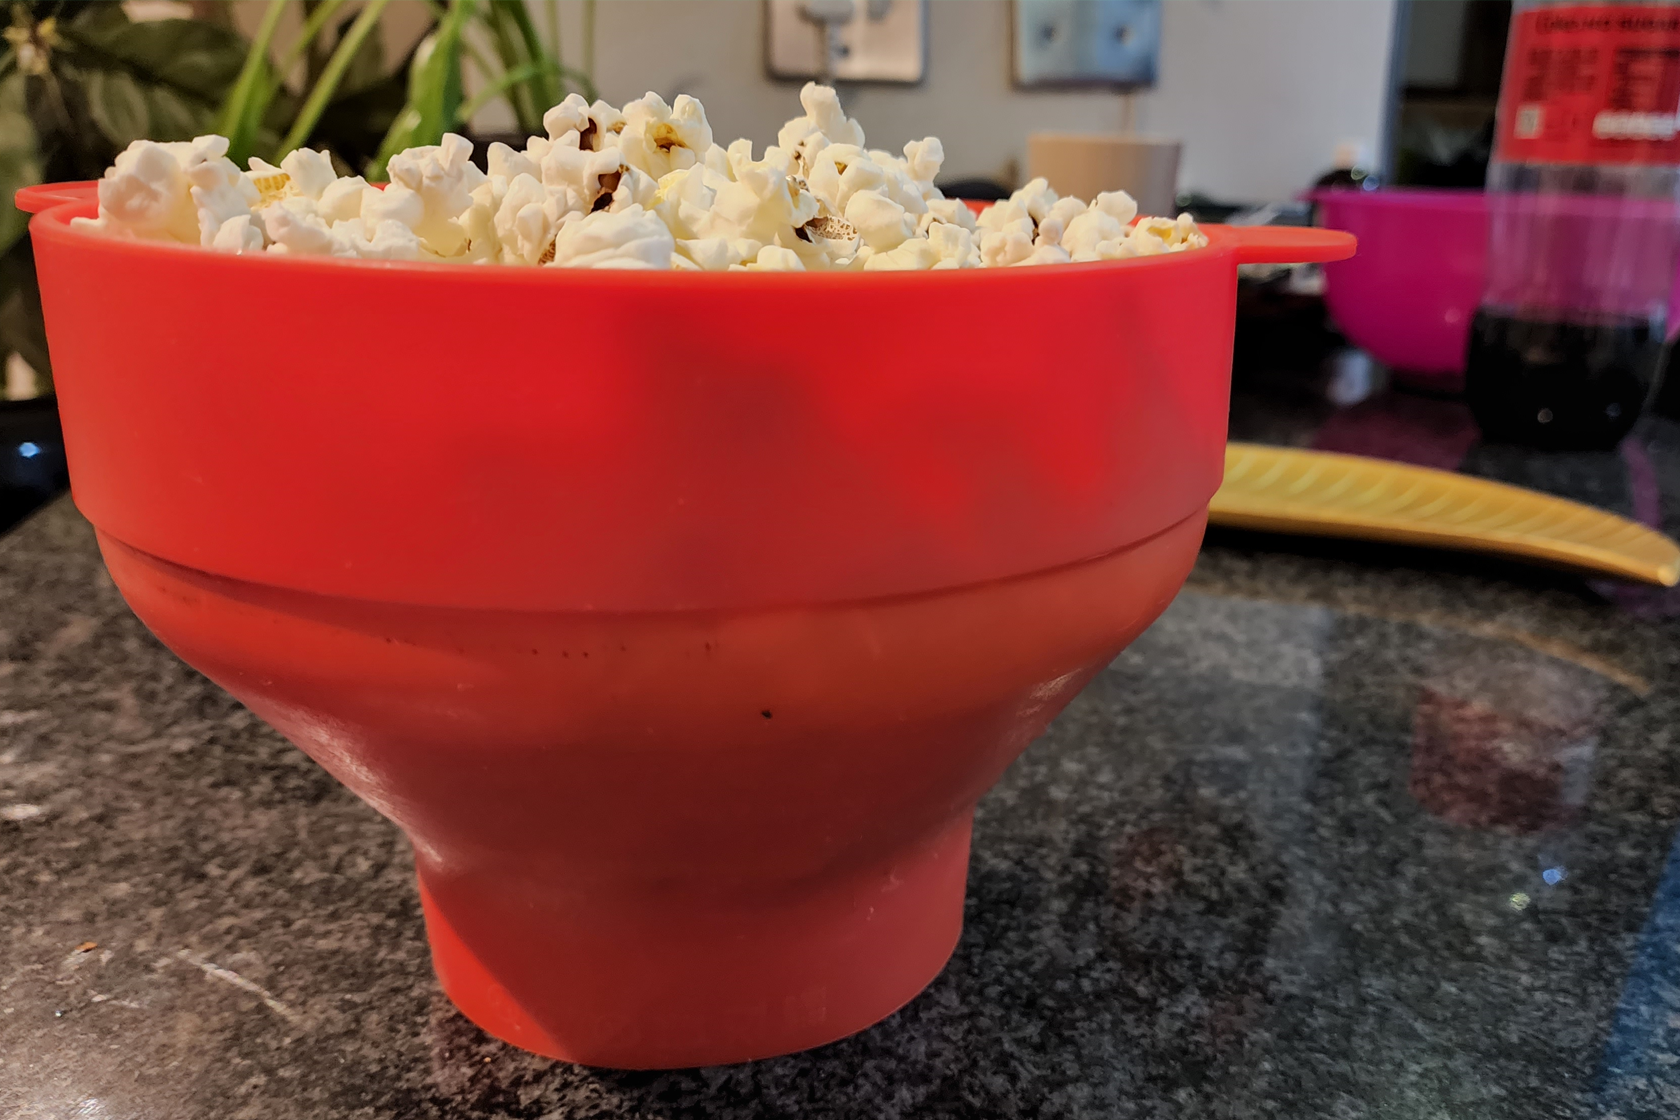 The Original Popco silicone microwave popcorn popper review from